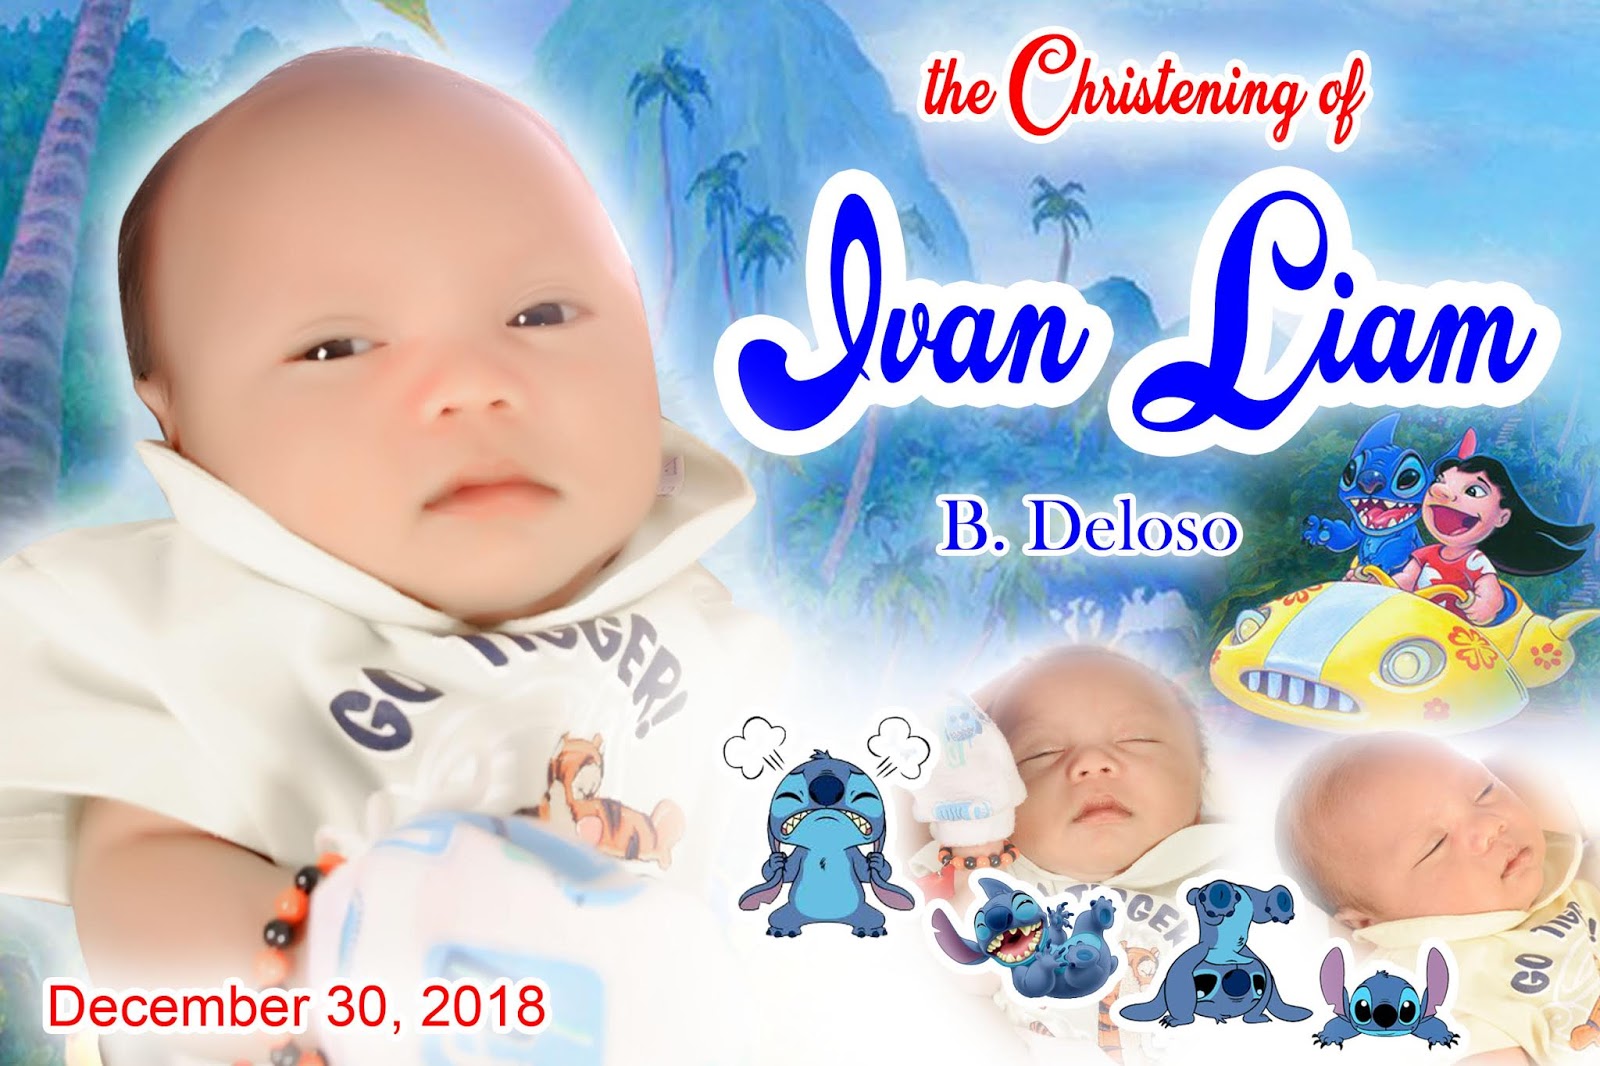 the-christening-of-ivan-liam-b-deloso-tarp-layout-free-download-psd-free-psd-fully